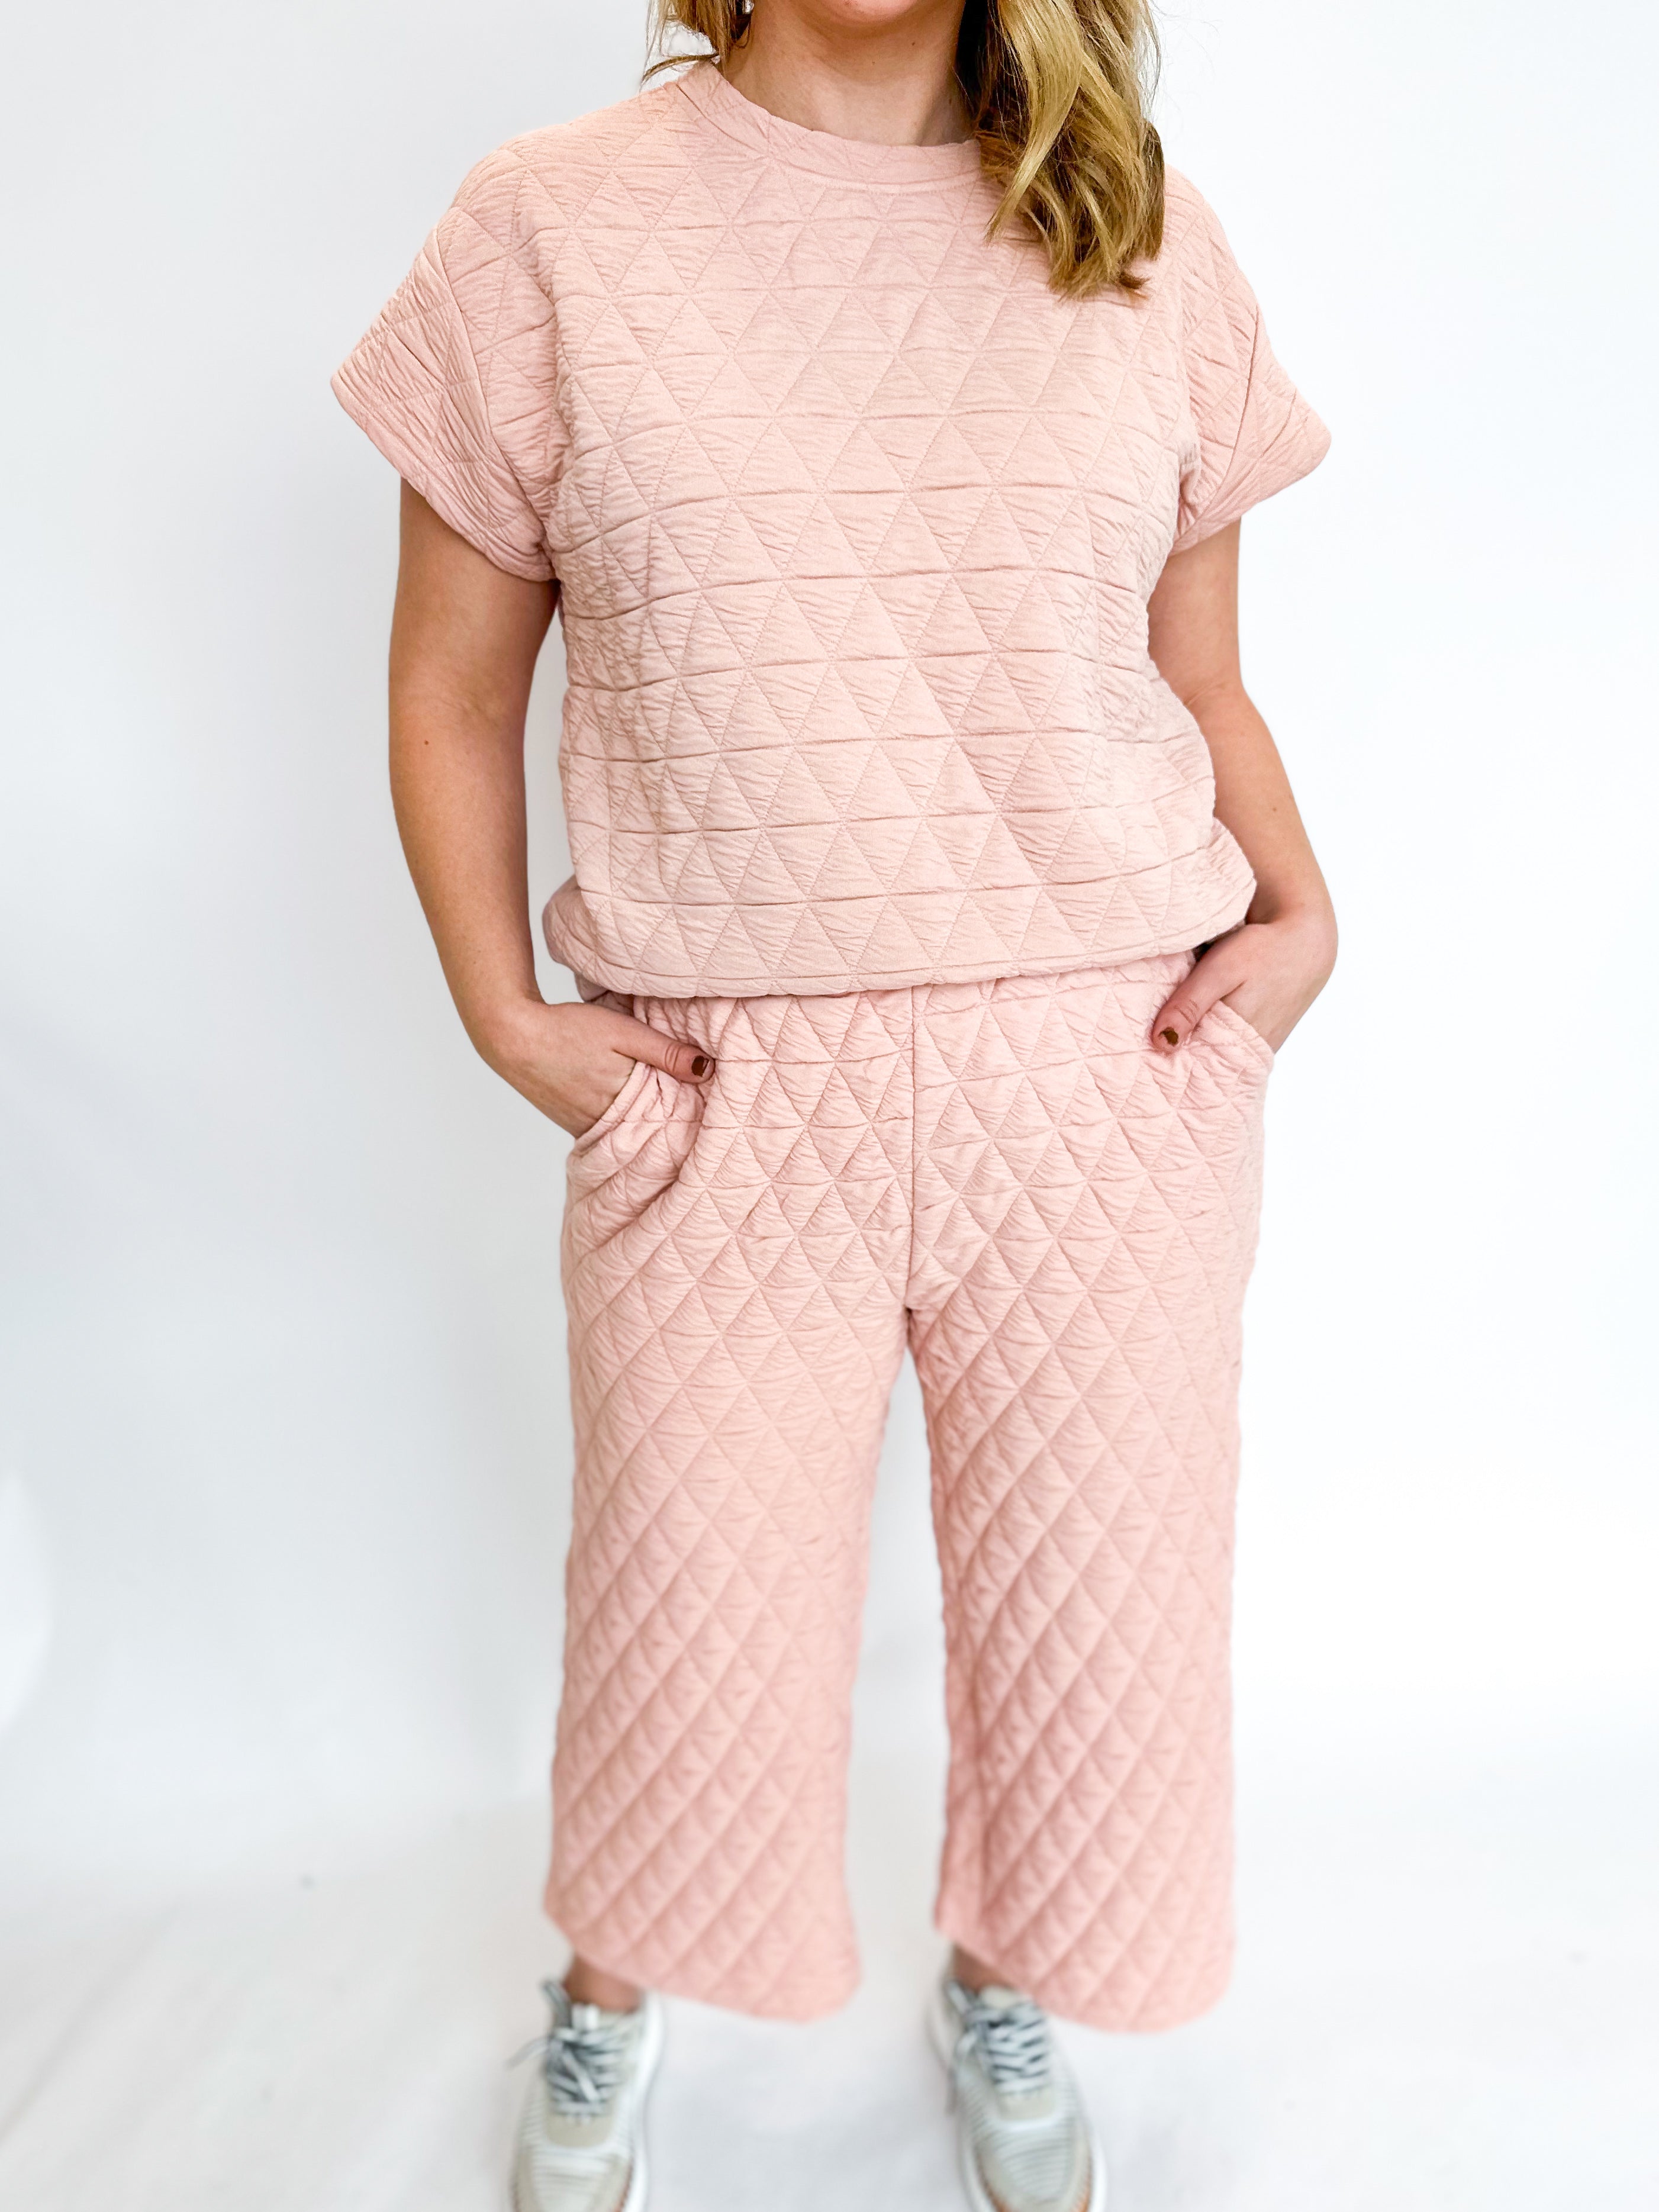 Quilted Set - The Abby-300 Athleisure/Lounge-SEE AND BE SEEN-July & June Women's Fashion Boutique Located in San Antonio, Texas